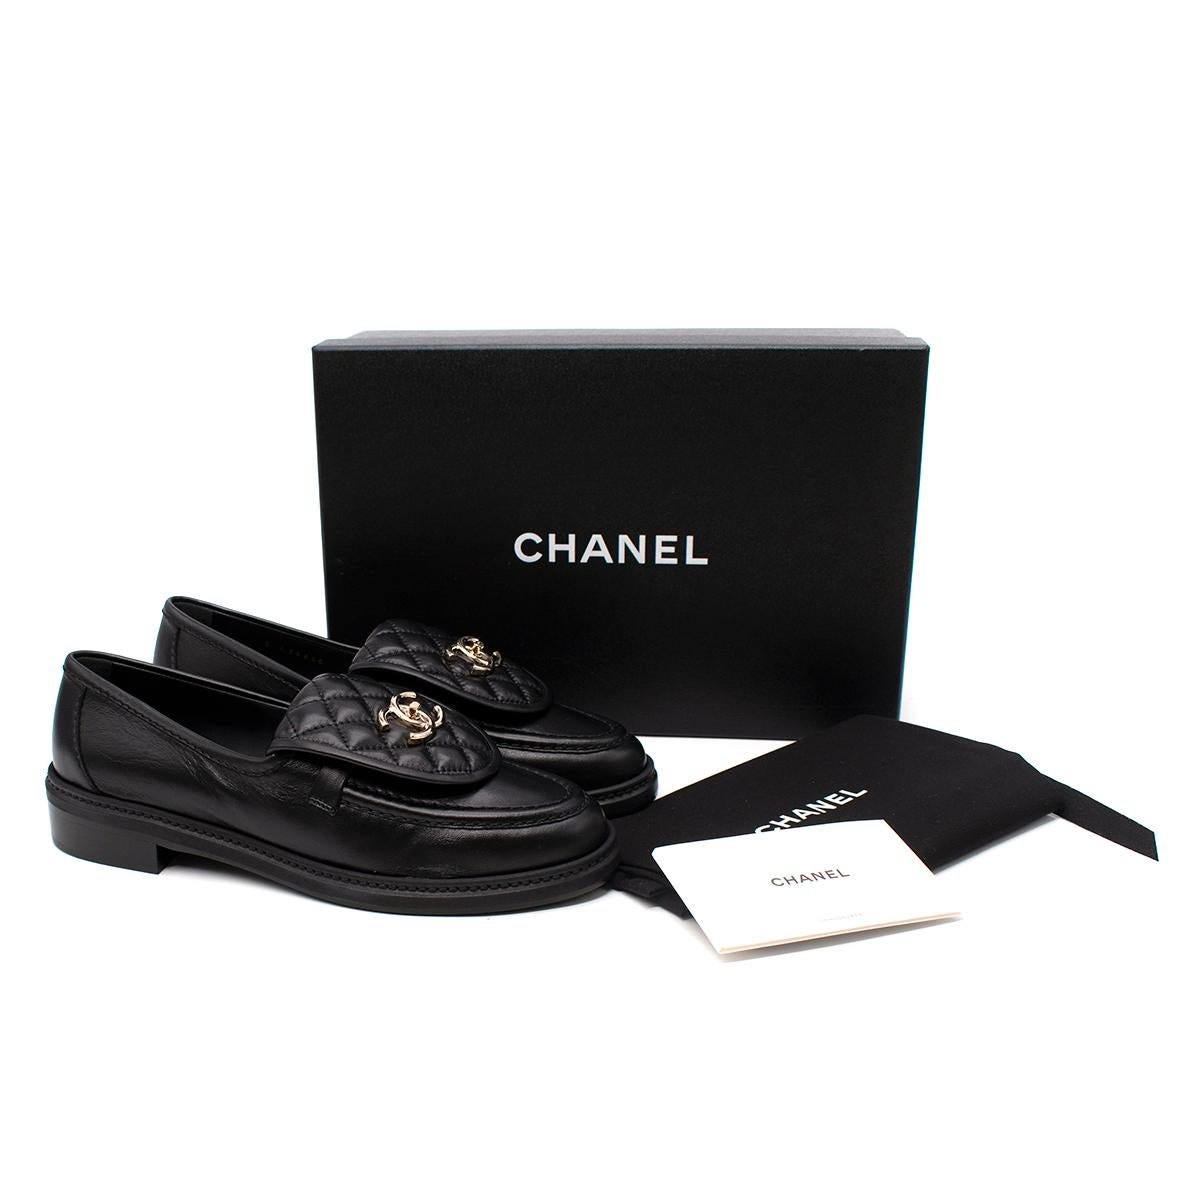 Chanel Black Quilted Leather Loafers - Colour Sold Out/Rare

- Quilted flap 
- Gold-tone hardware
- Turnlock CC details on the flap
- Rounded toe

Materials:
Leather

Made in Italy

PLEASE NOTE, THESE ITEMS ARE PRE-OWNED AND MAY SHOW SIGNS OF BEING